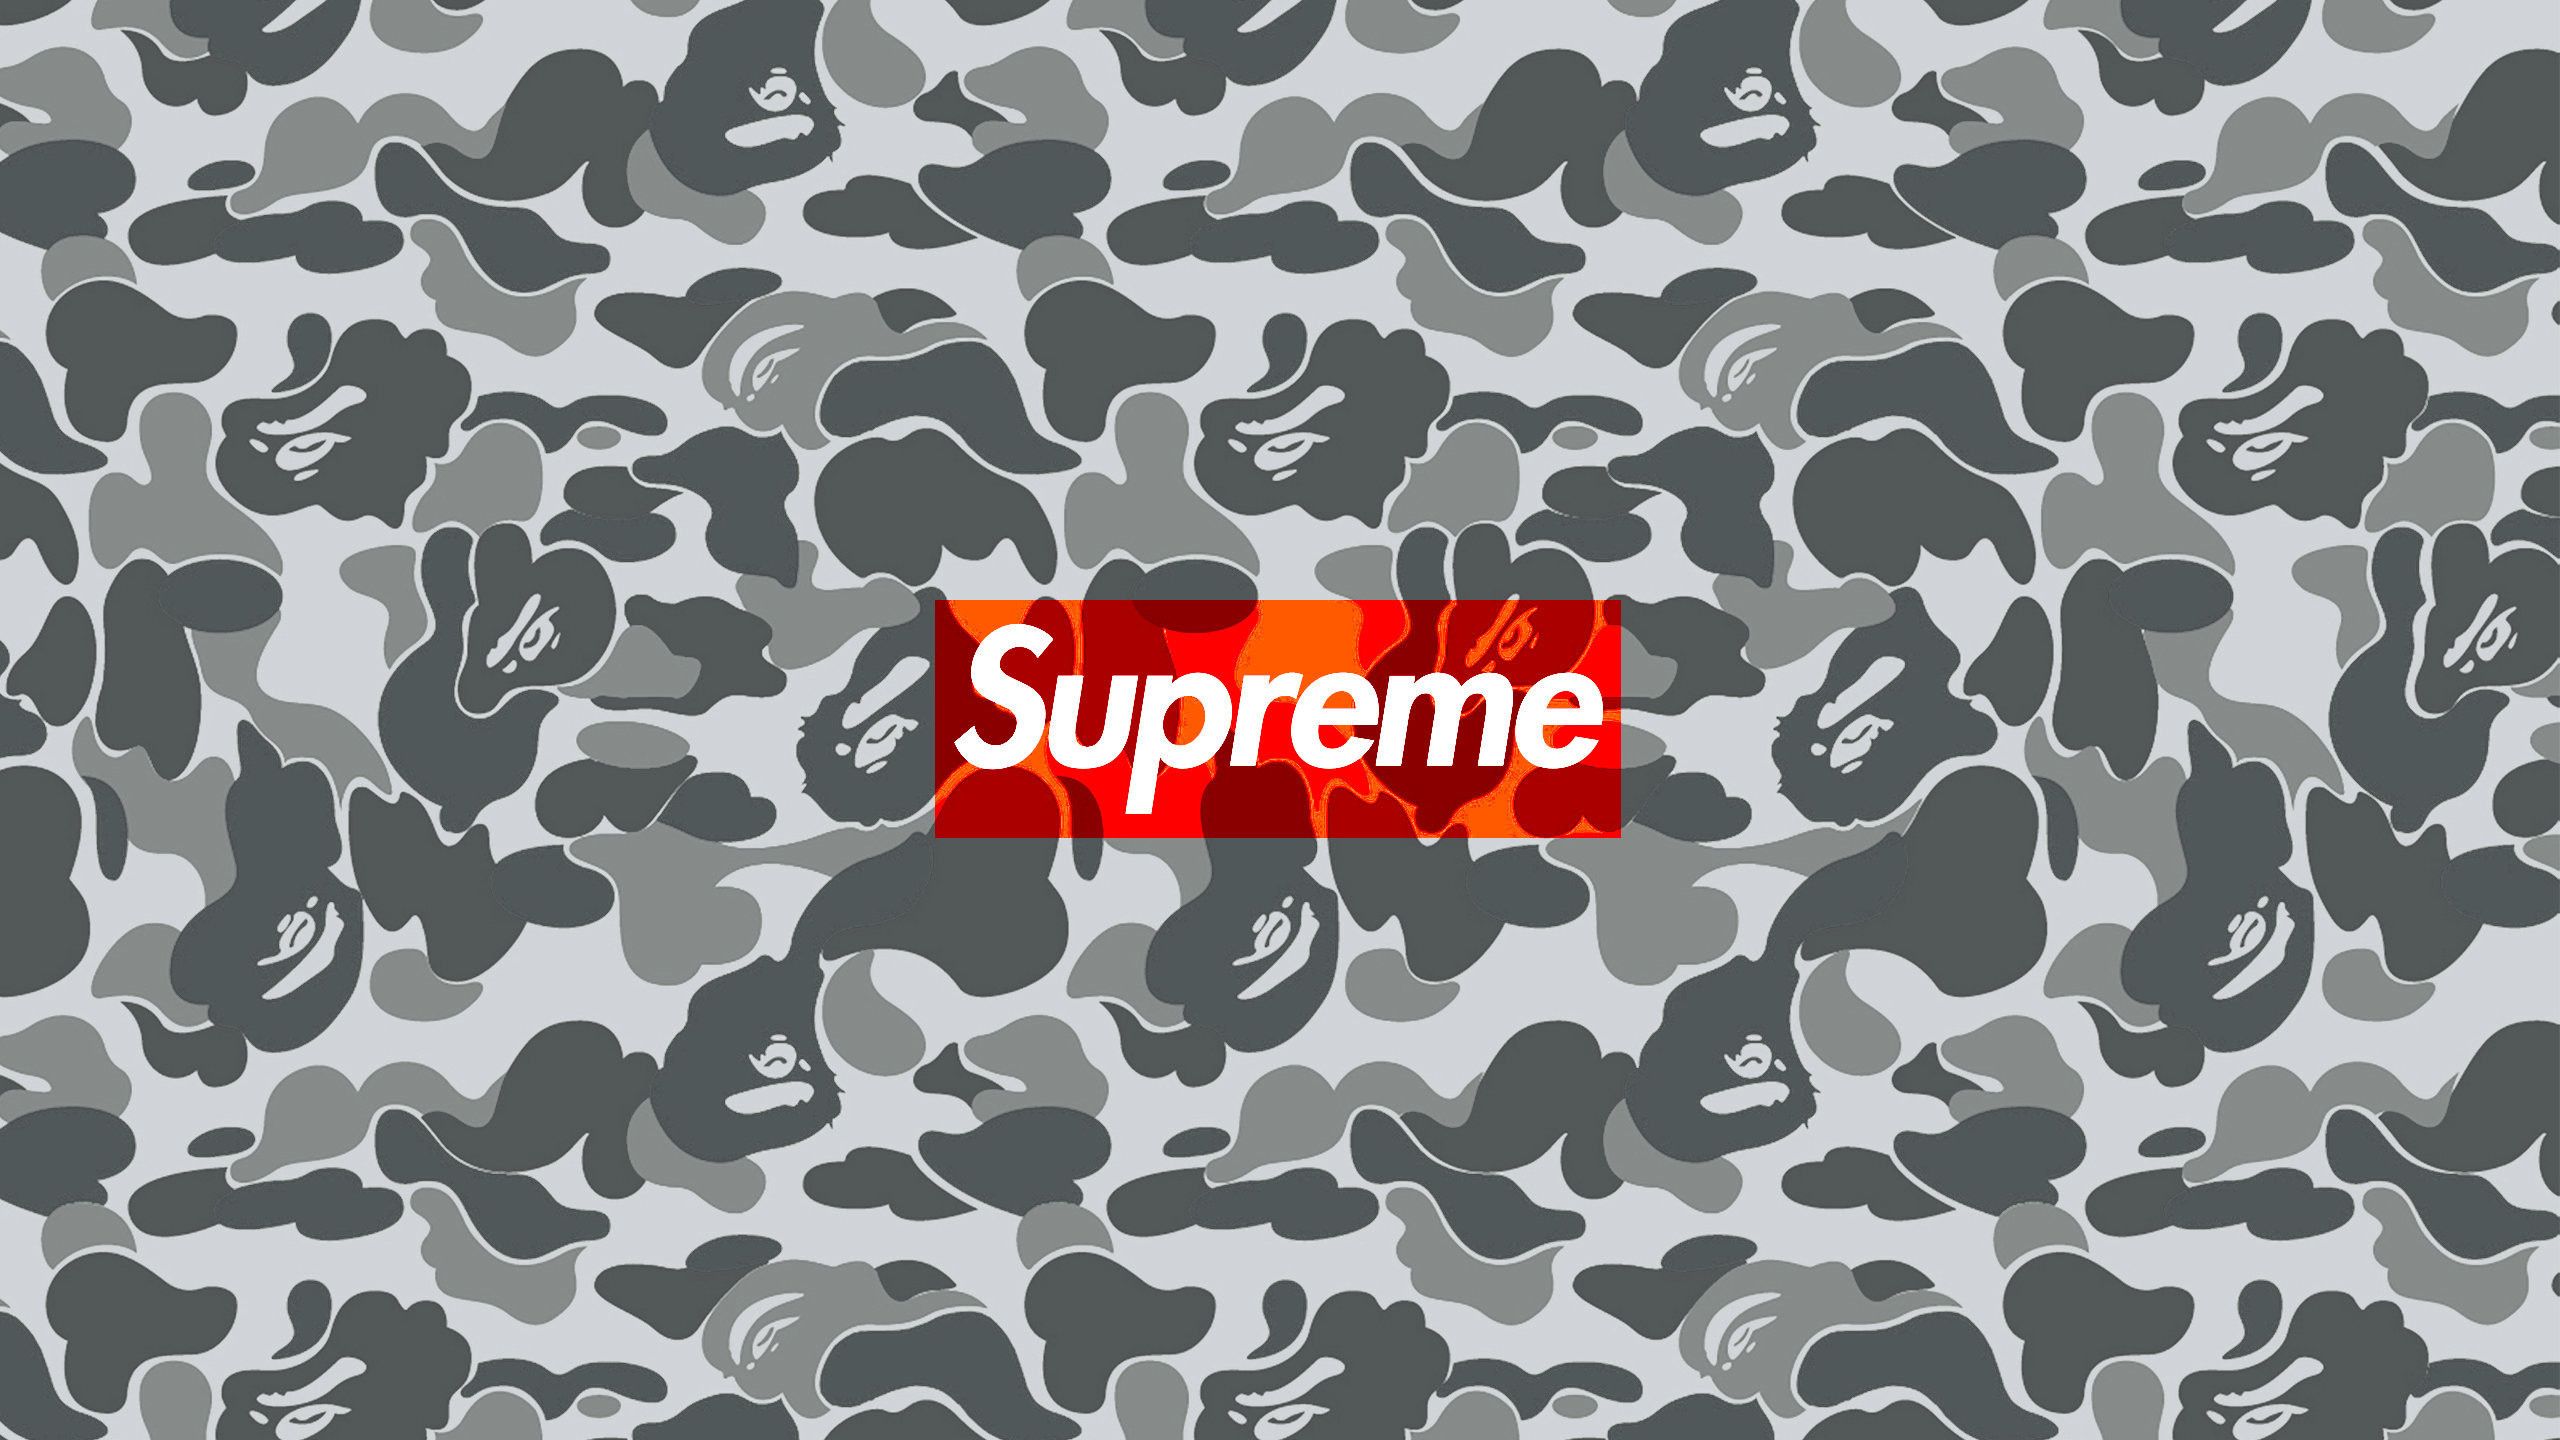 Bape wallpapers i made for the iphone 5 ps they Here is an example